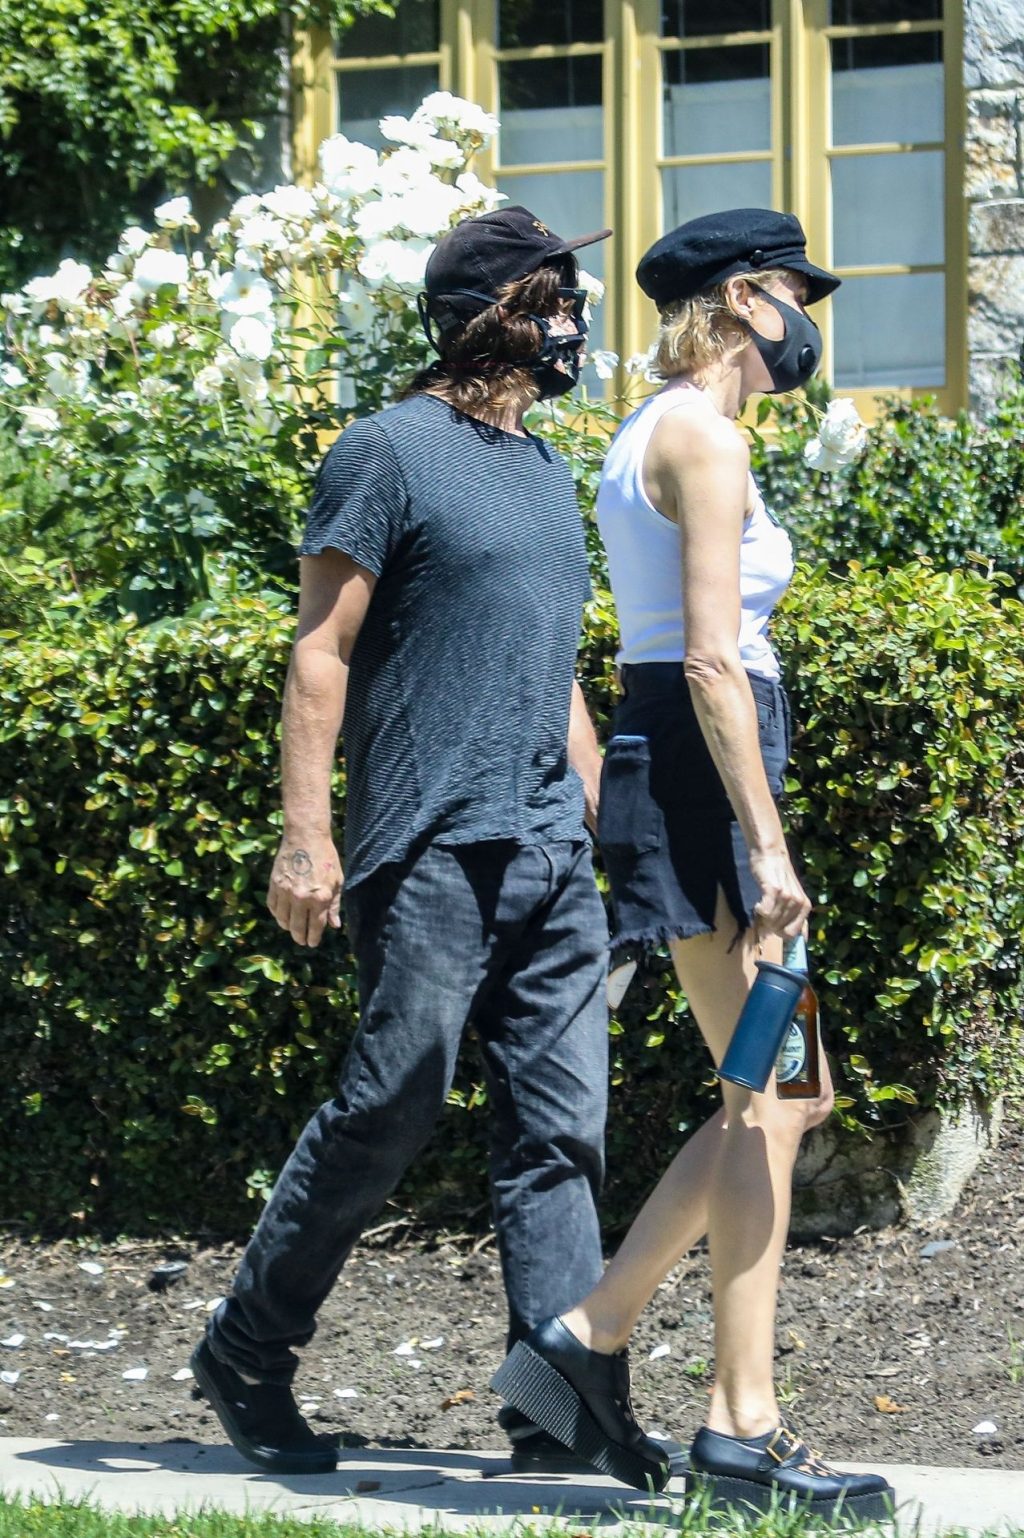 Diane Kruger &amp; Norman Reedus Attend a House Party During the COVID-19 Outbreak (27 Photos)